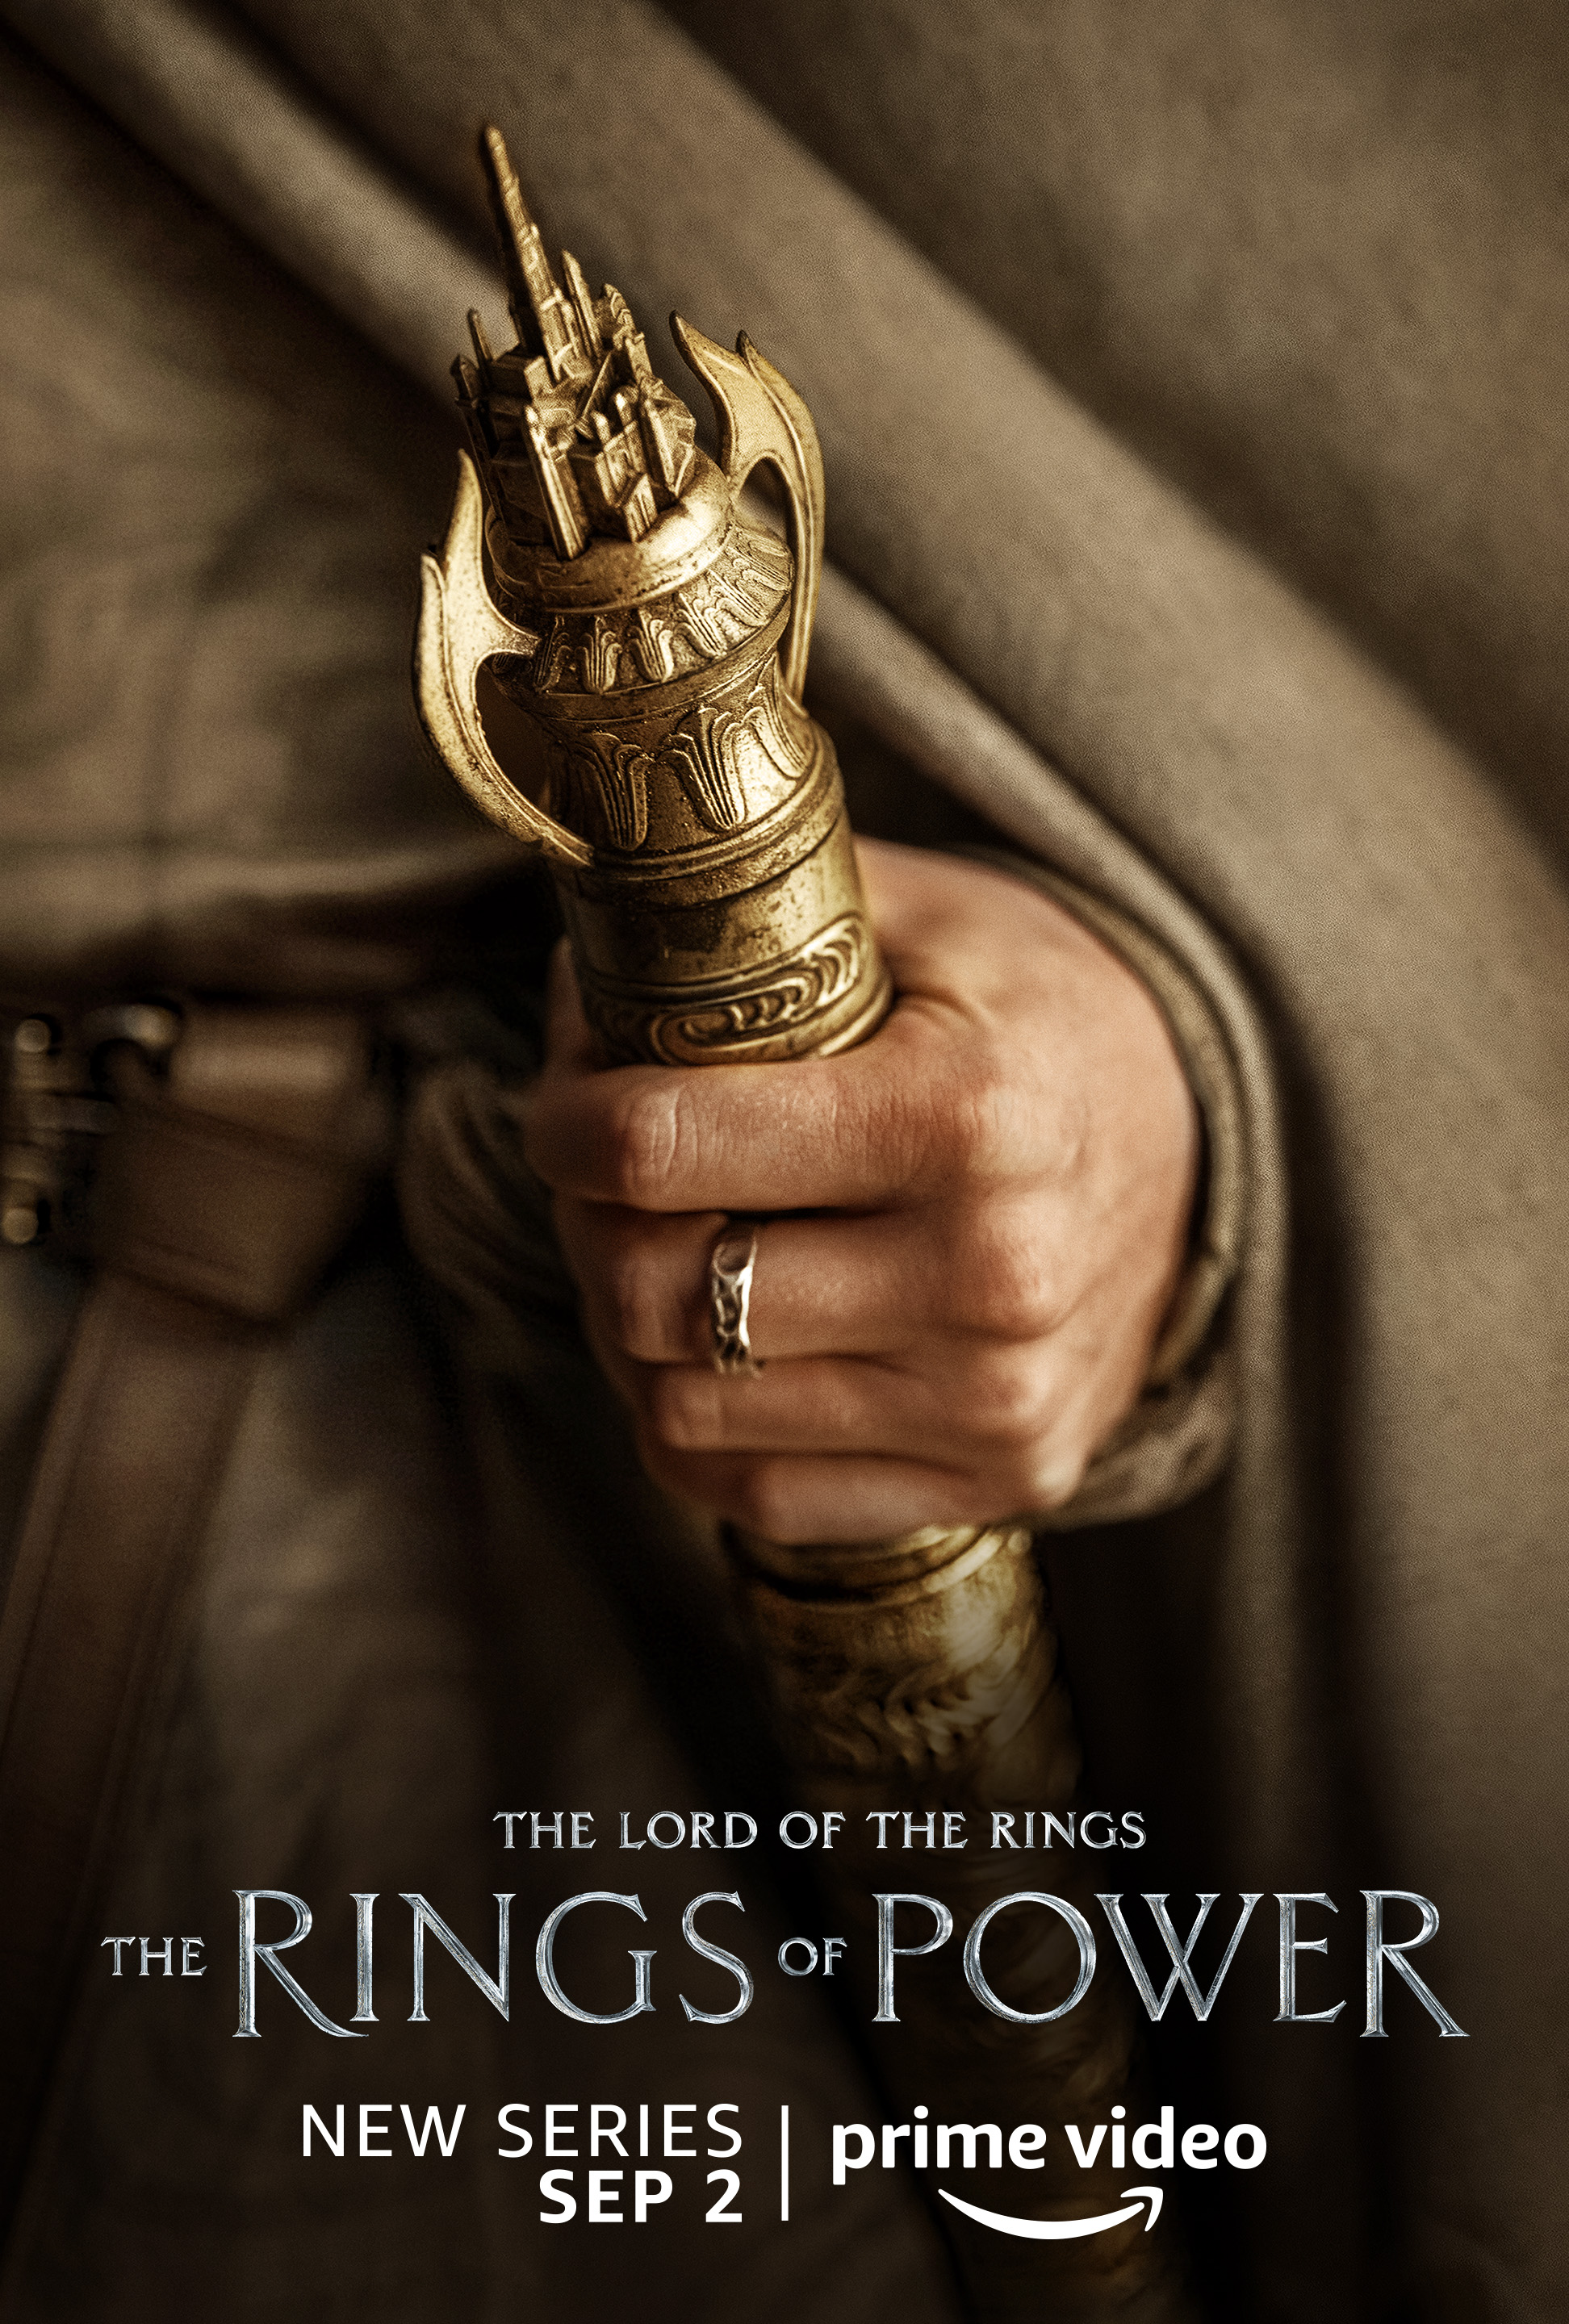 Who's Who in “The Lord of the Rings: The Rings of Power” / X